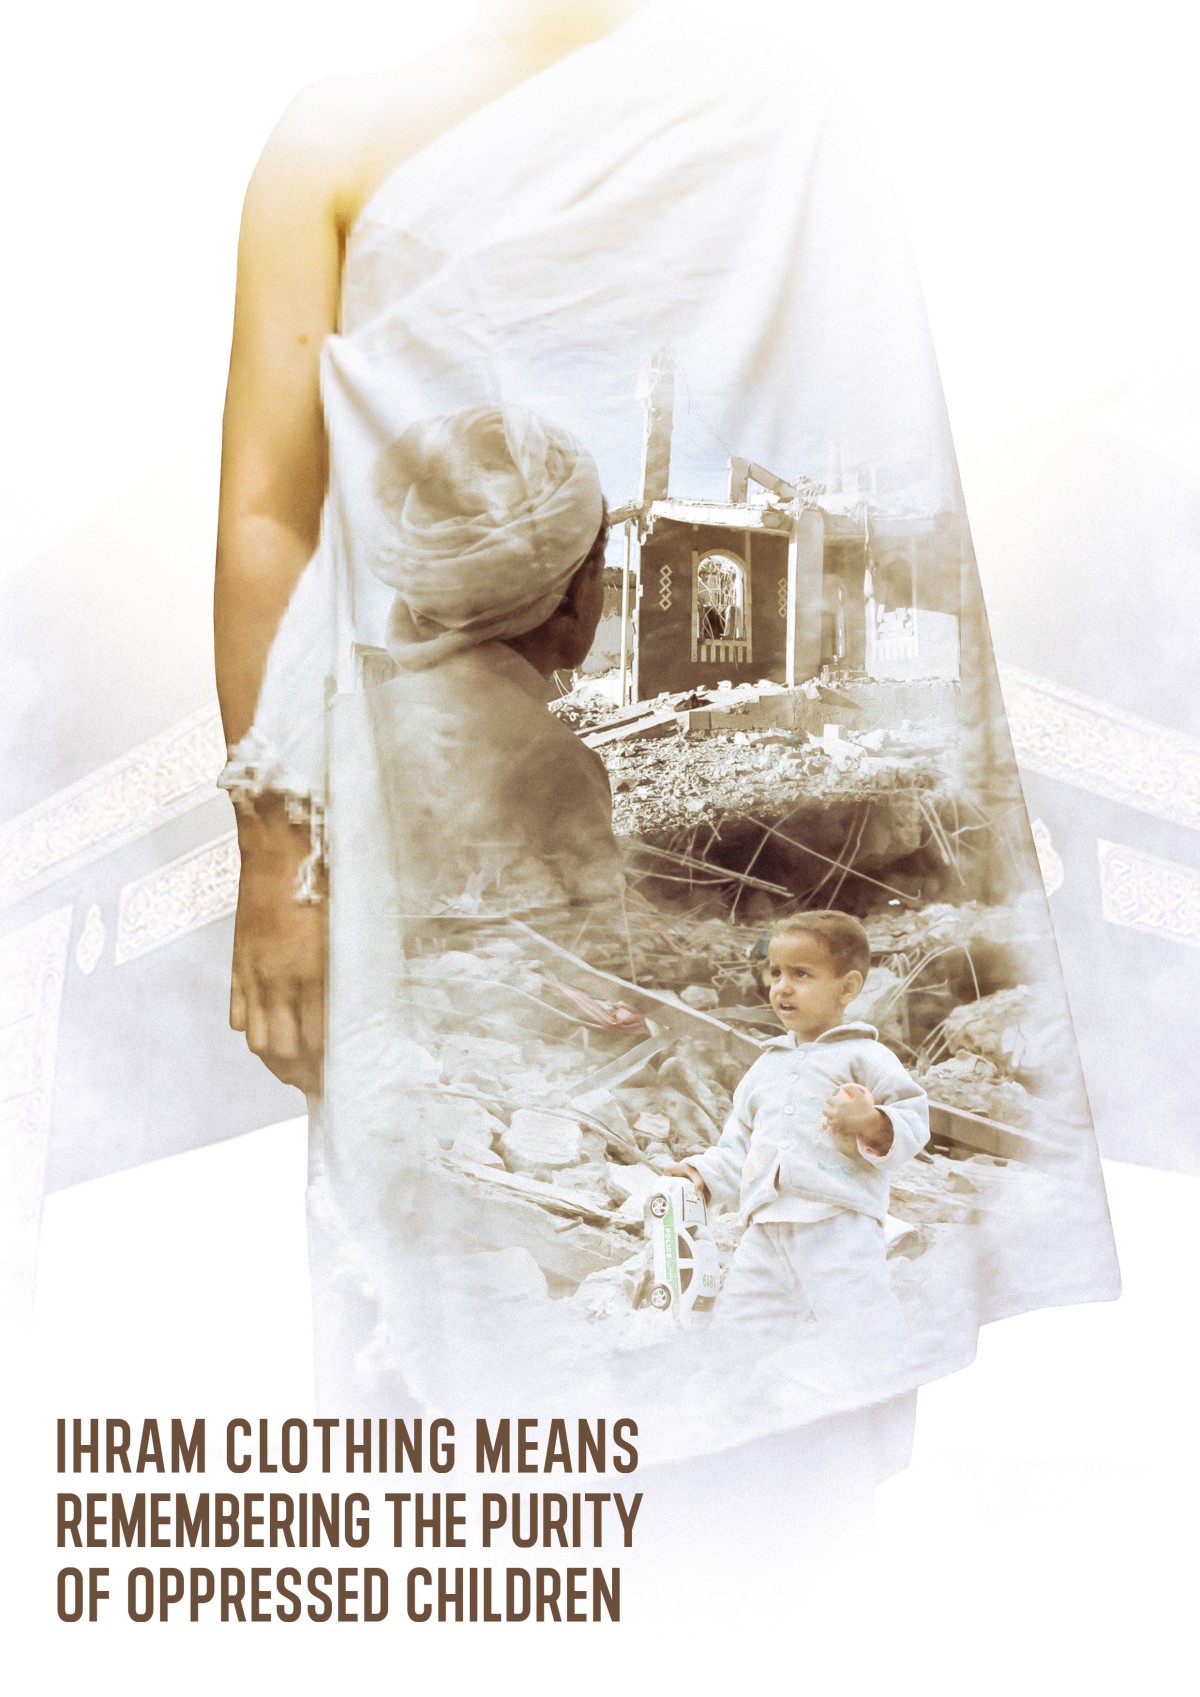 ihram clothing means remembering the purity of oppressed children